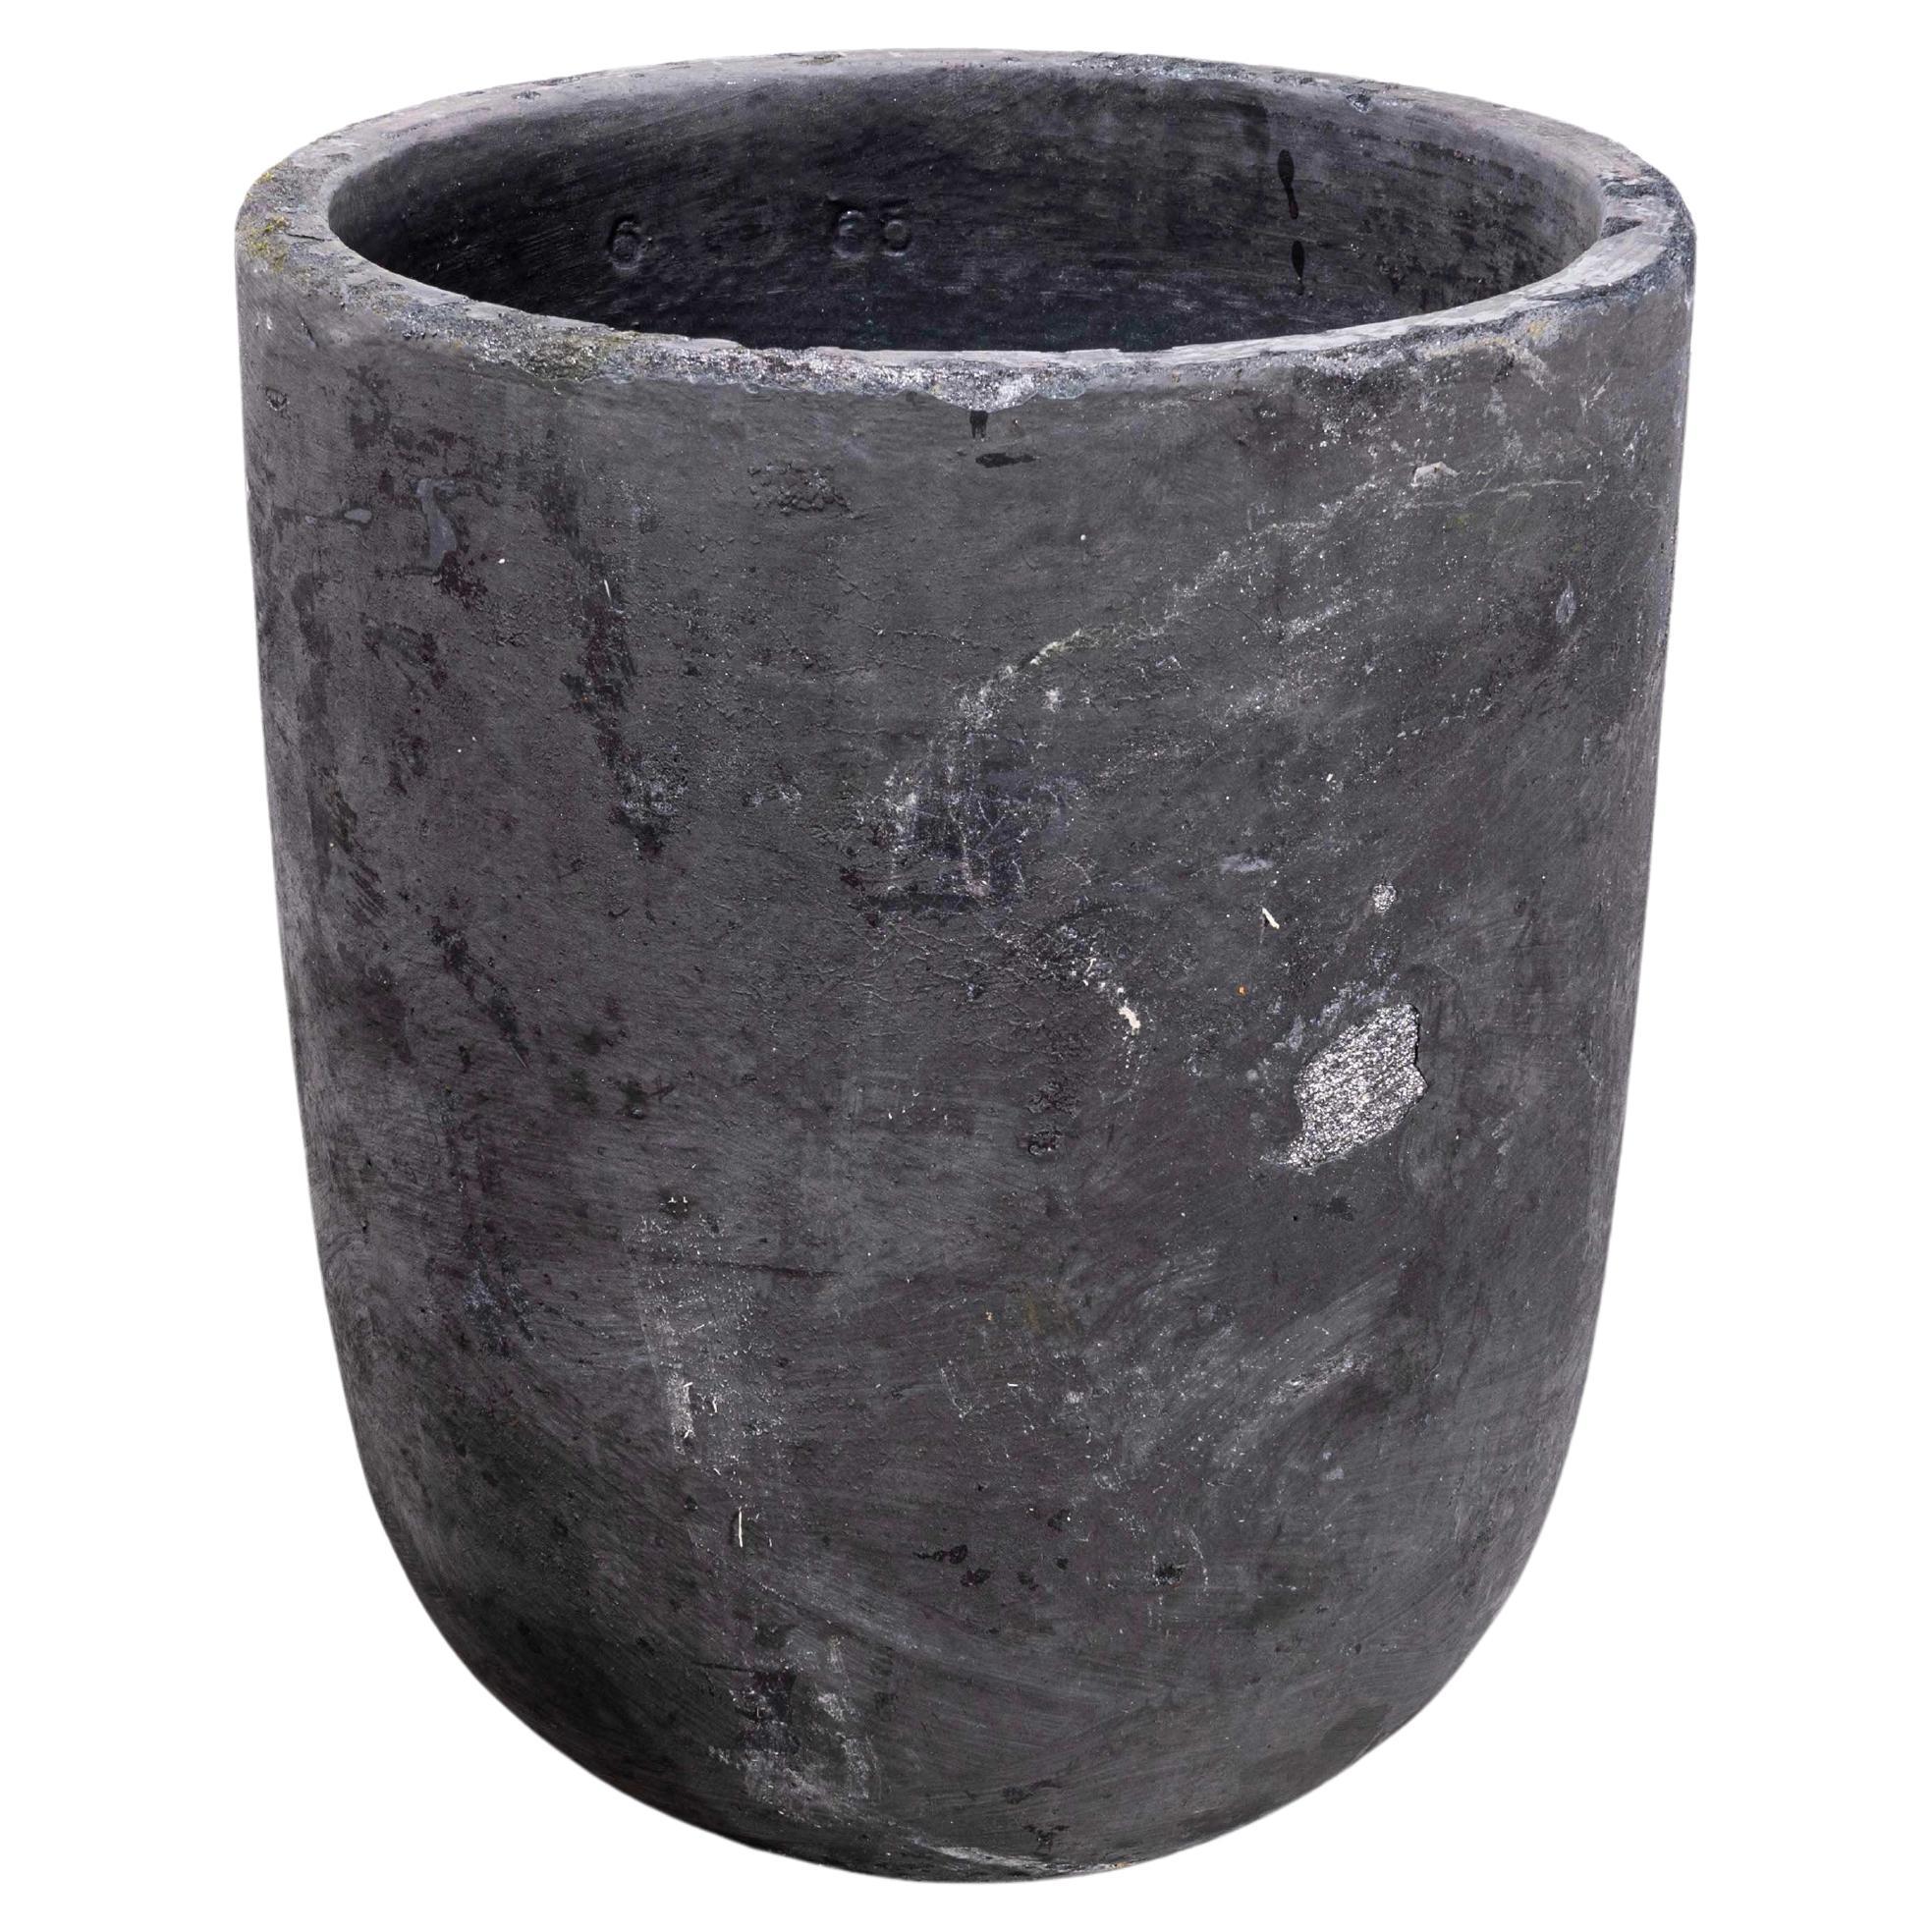 1970's New Old Stock Foundry Crucible Pot (1525.5)